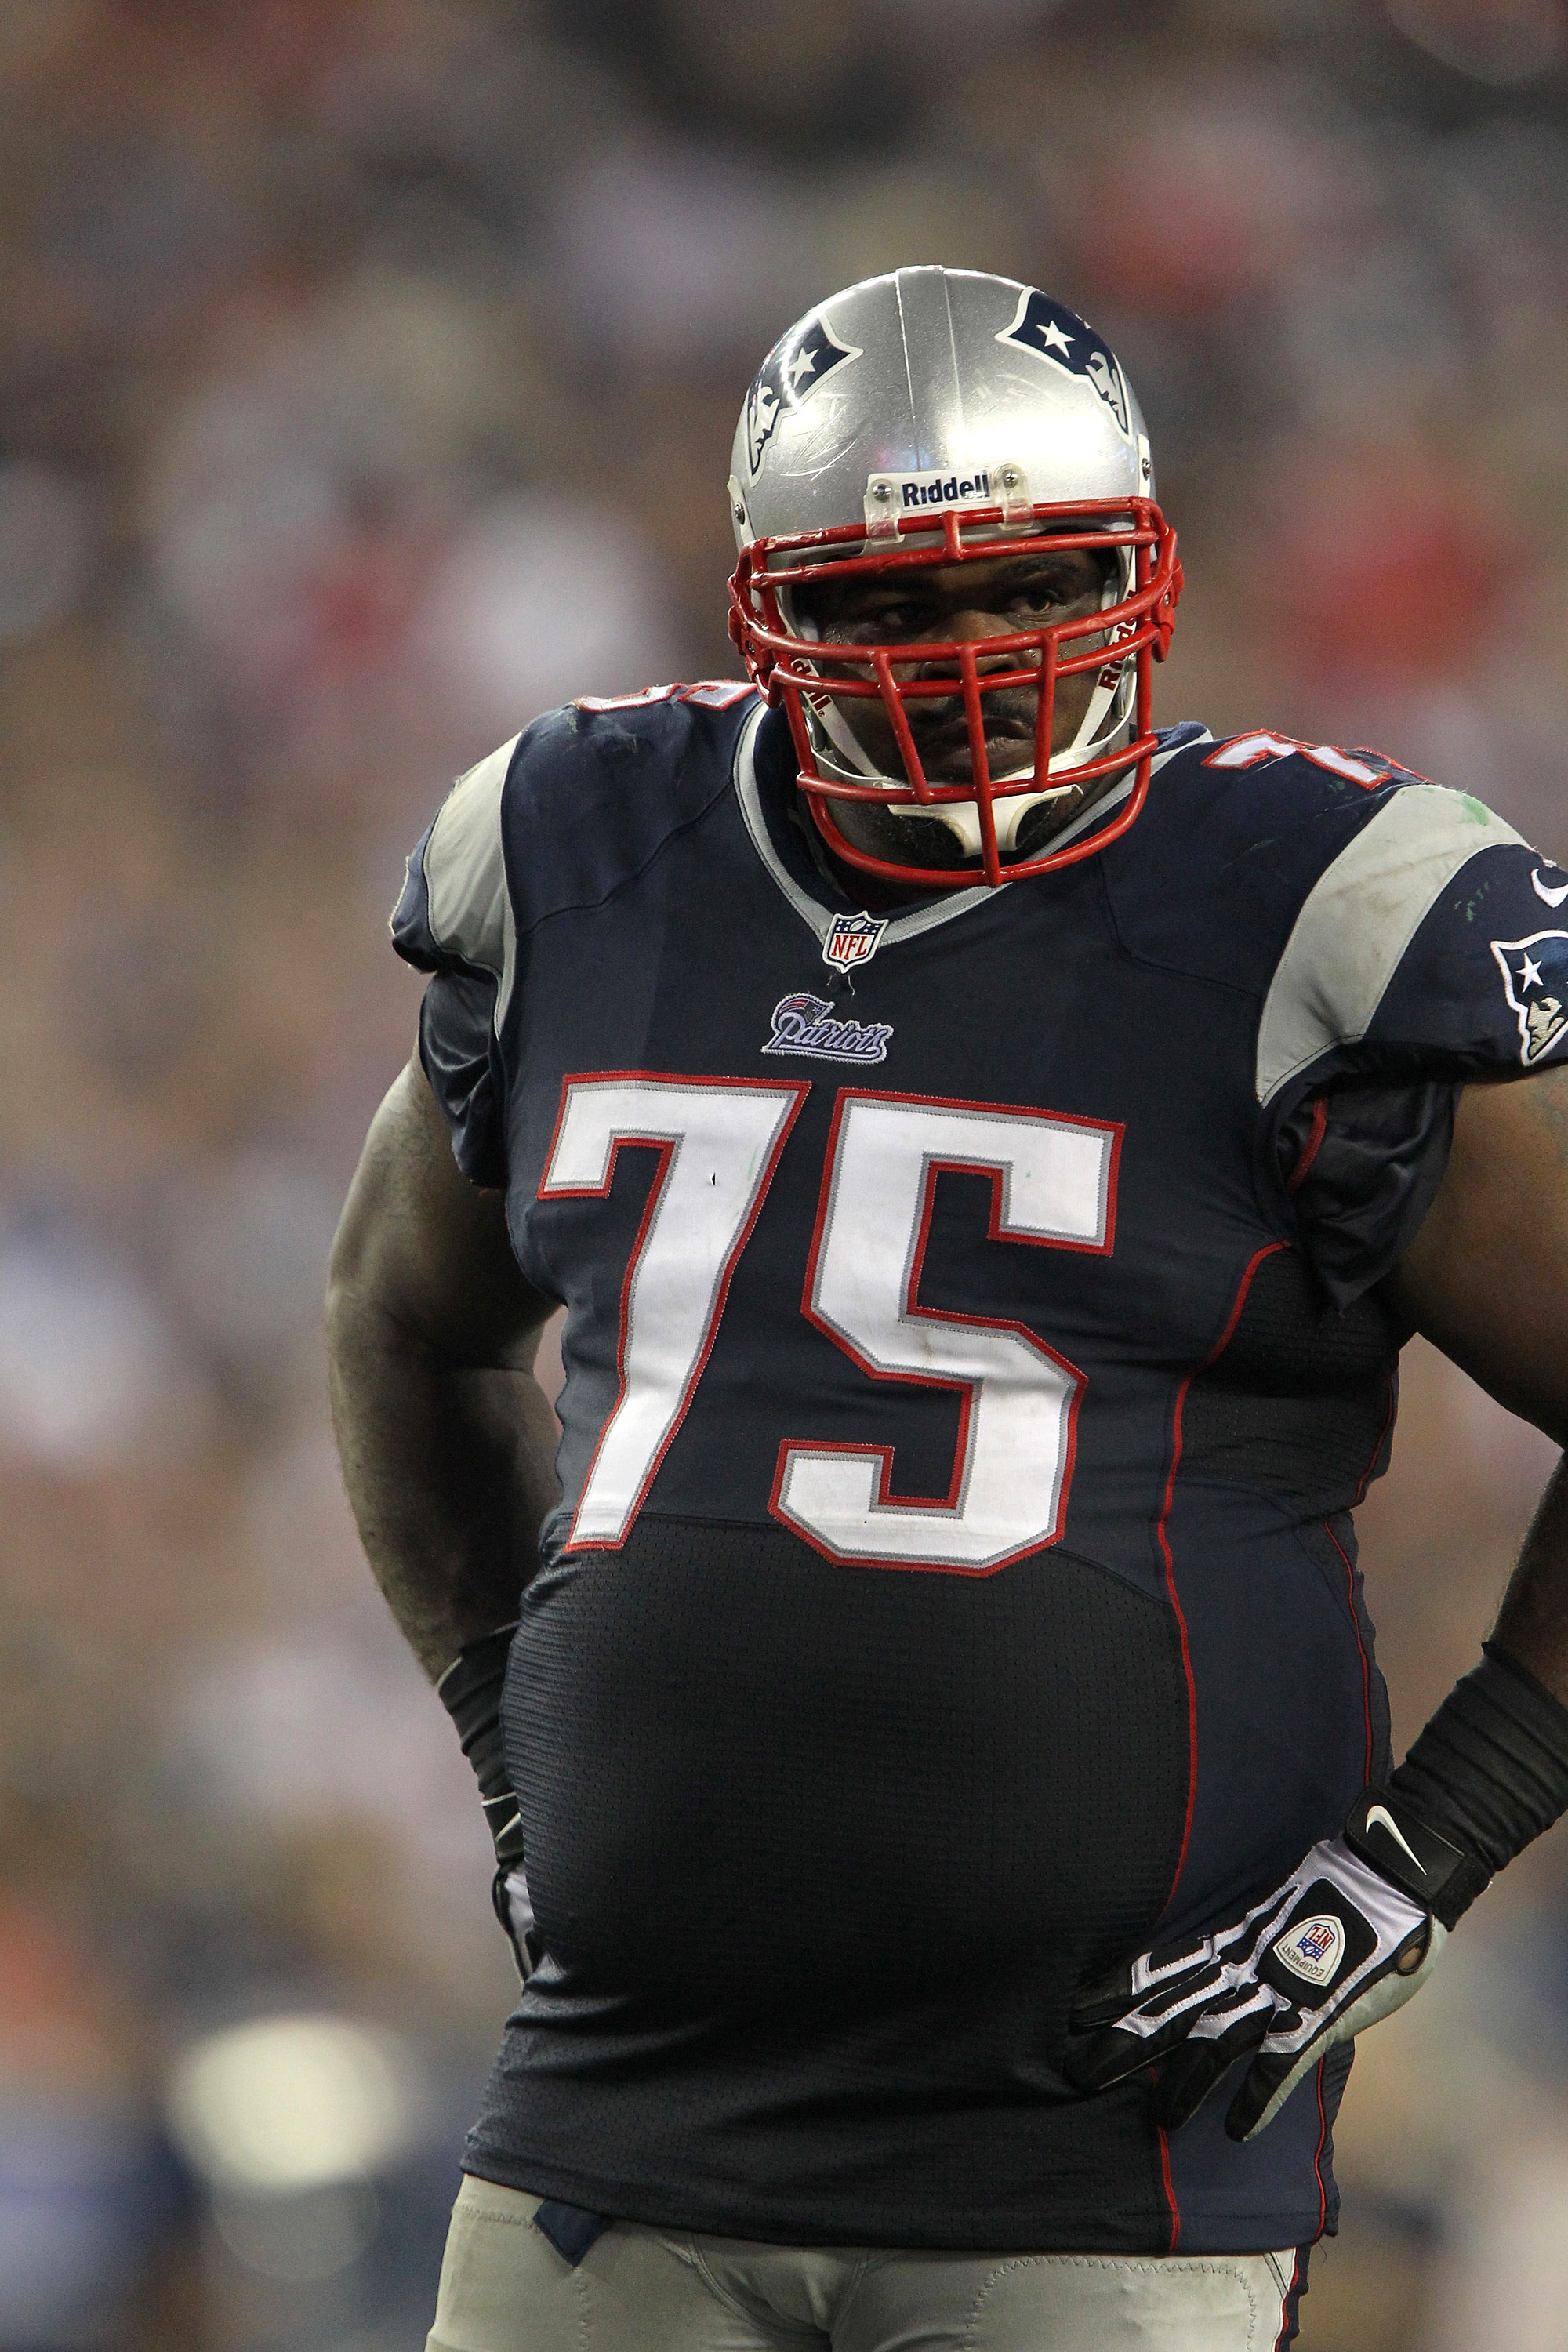 Defensive Lineman Vince Wilfork #75 of New England Patriots on September 12, 2013 in Foxboro, Massachusetts. (Al Pereira—Getty Images)